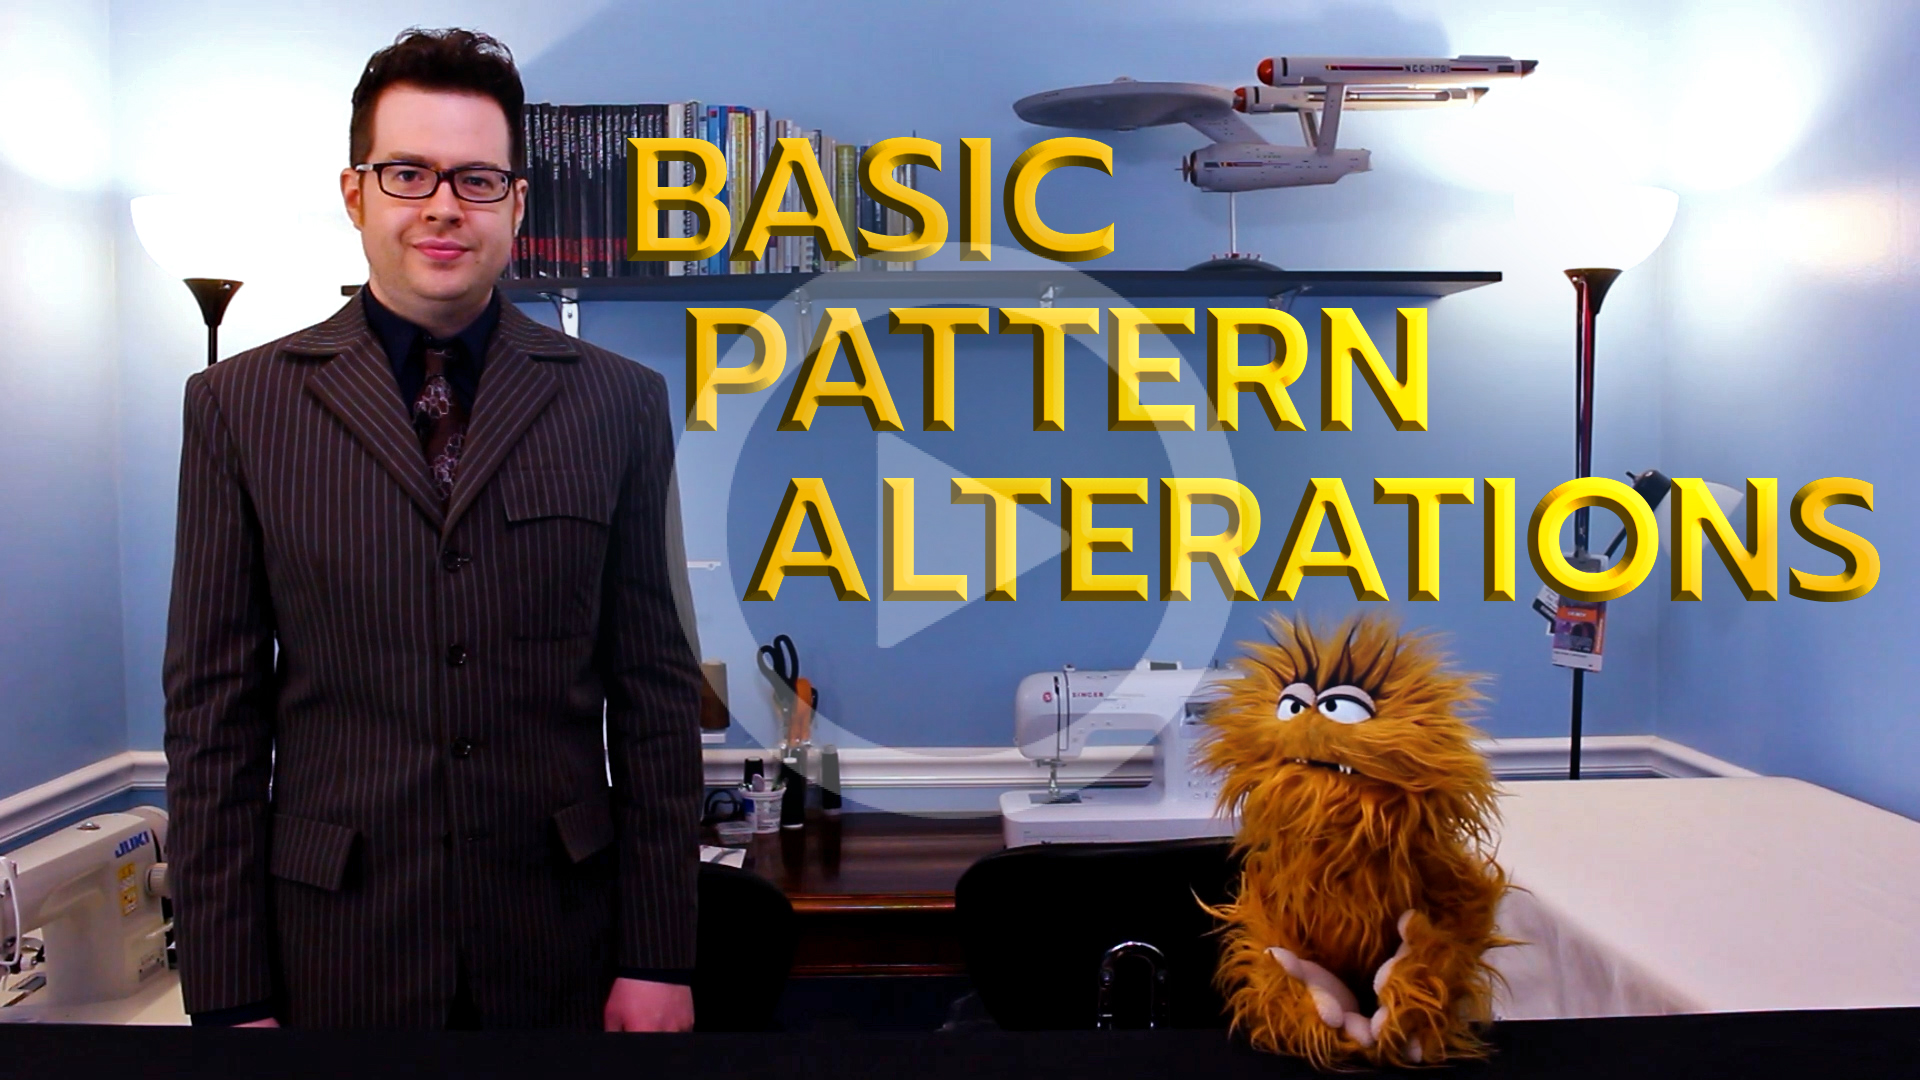 Basic Pattern Alterations - Tailors Gone Wild